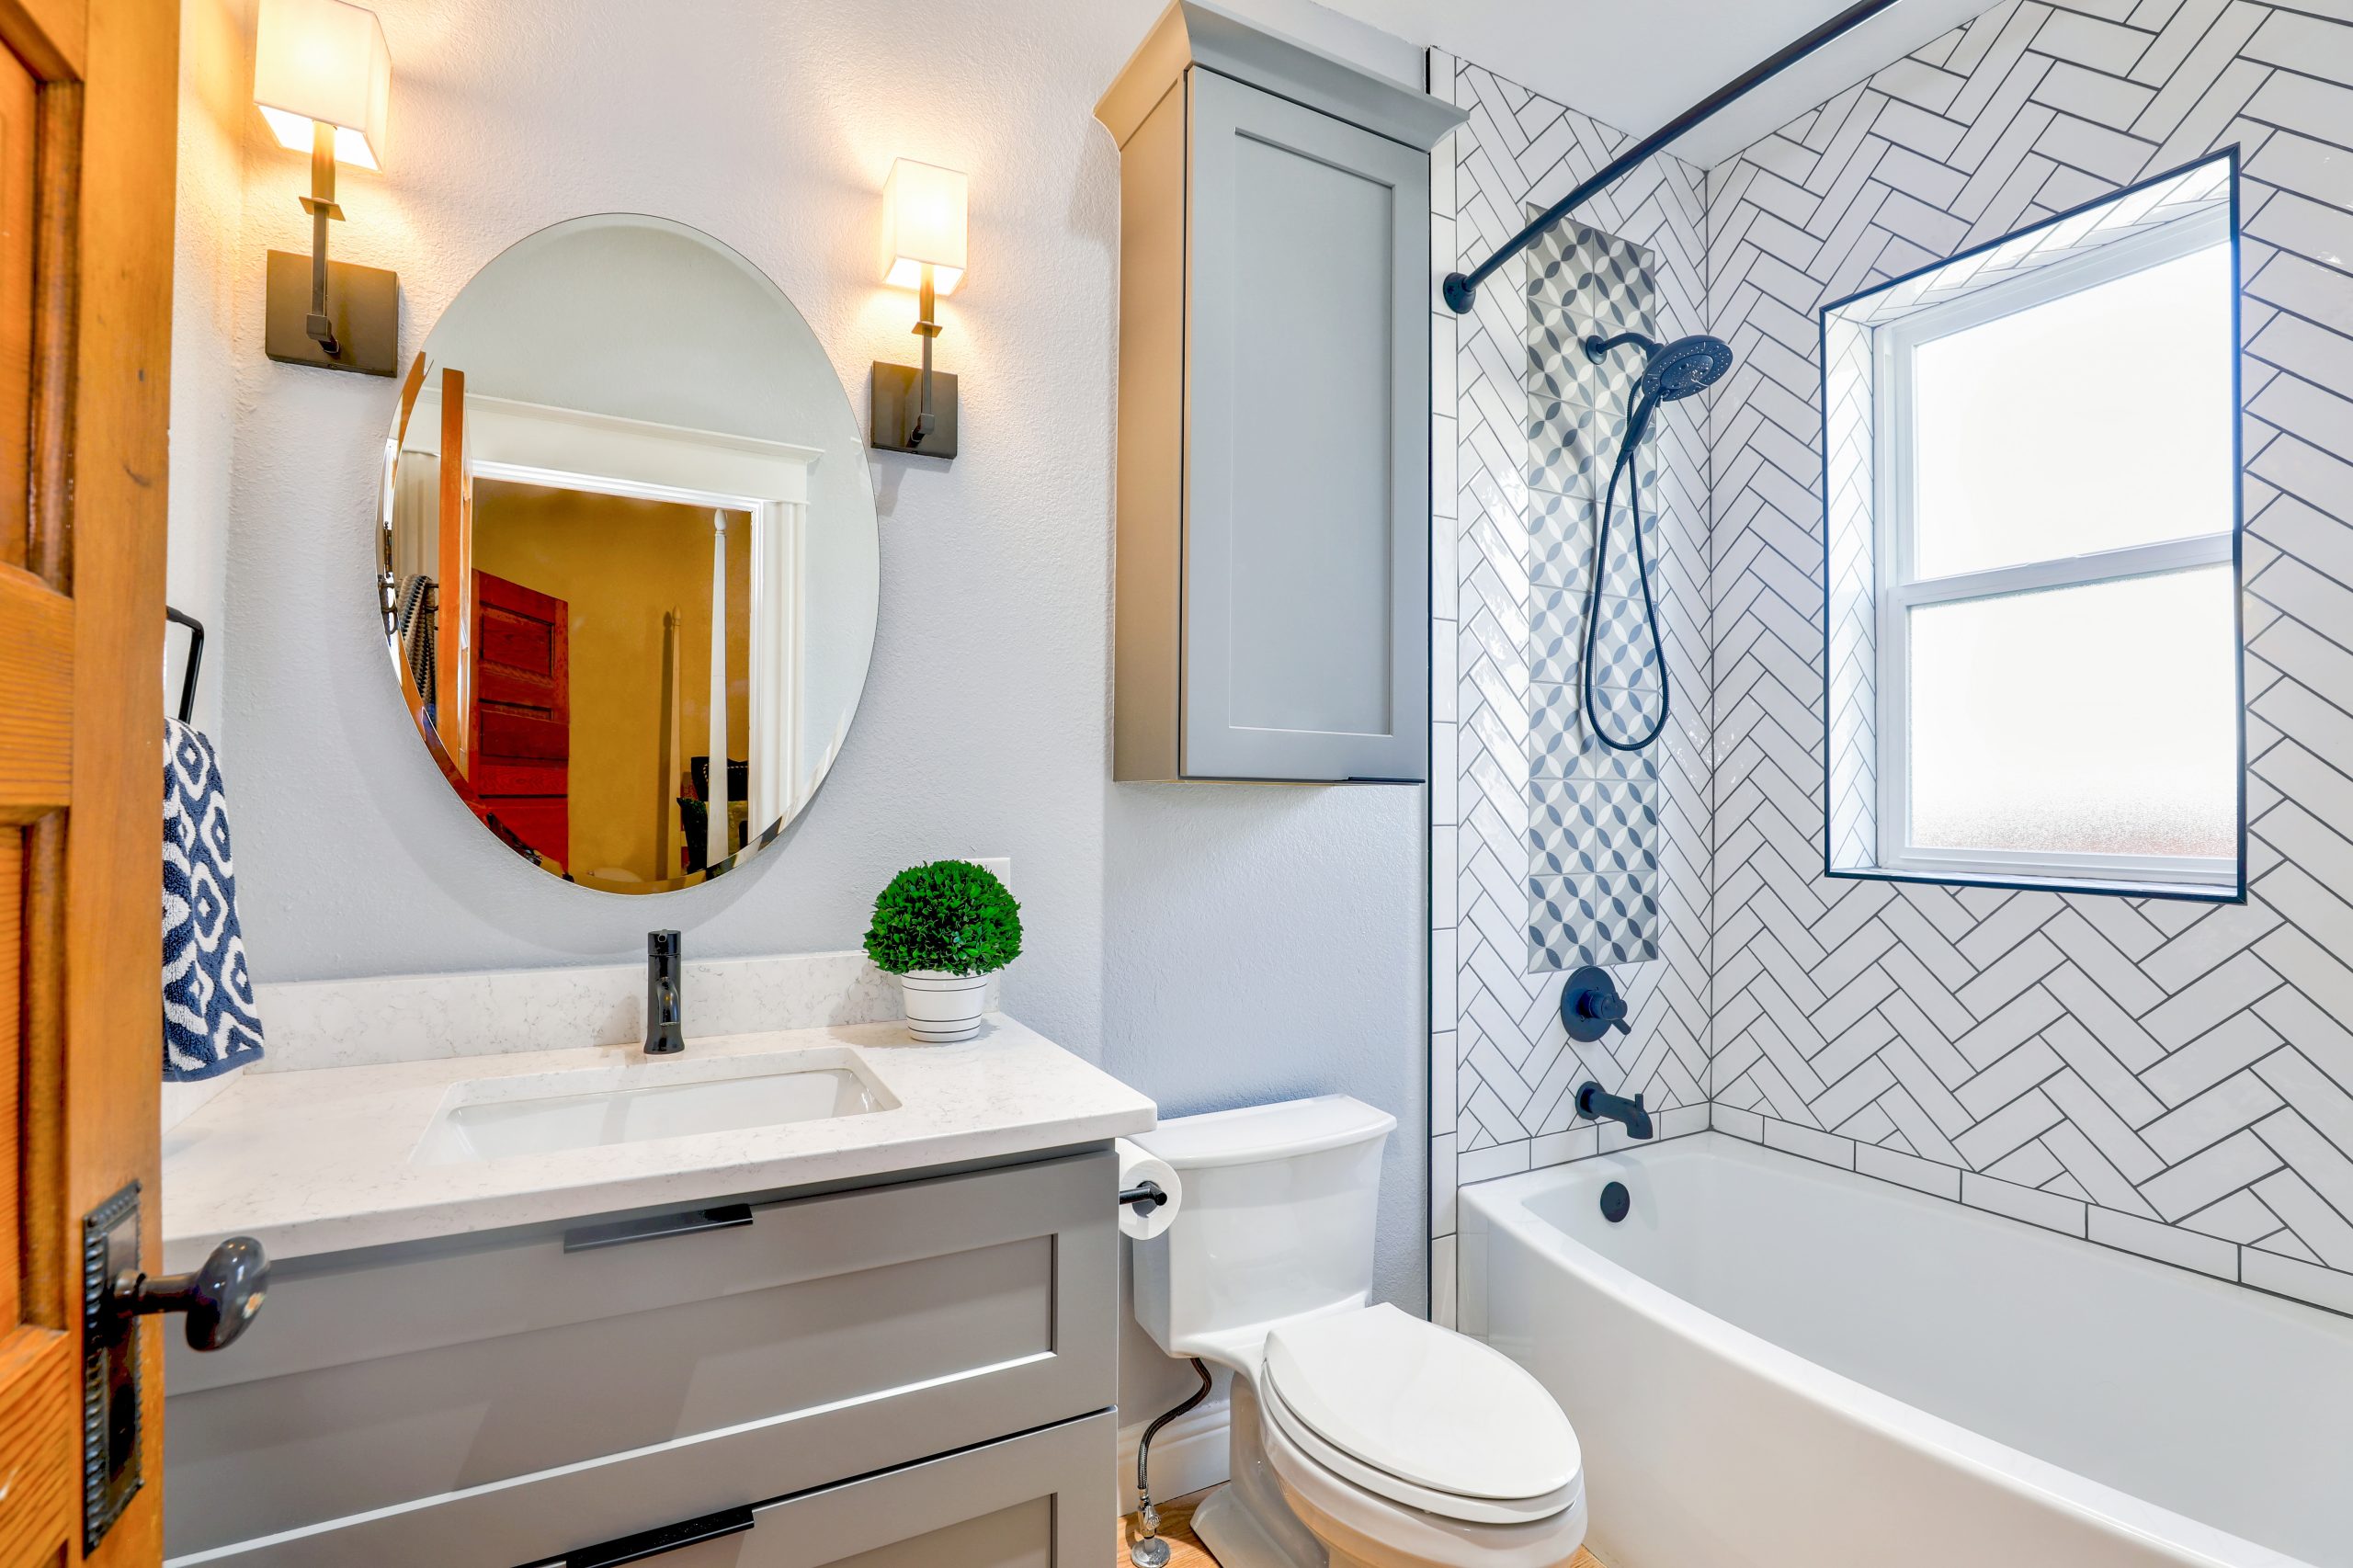 Matching Your Bathroom Faucet to Your Décor